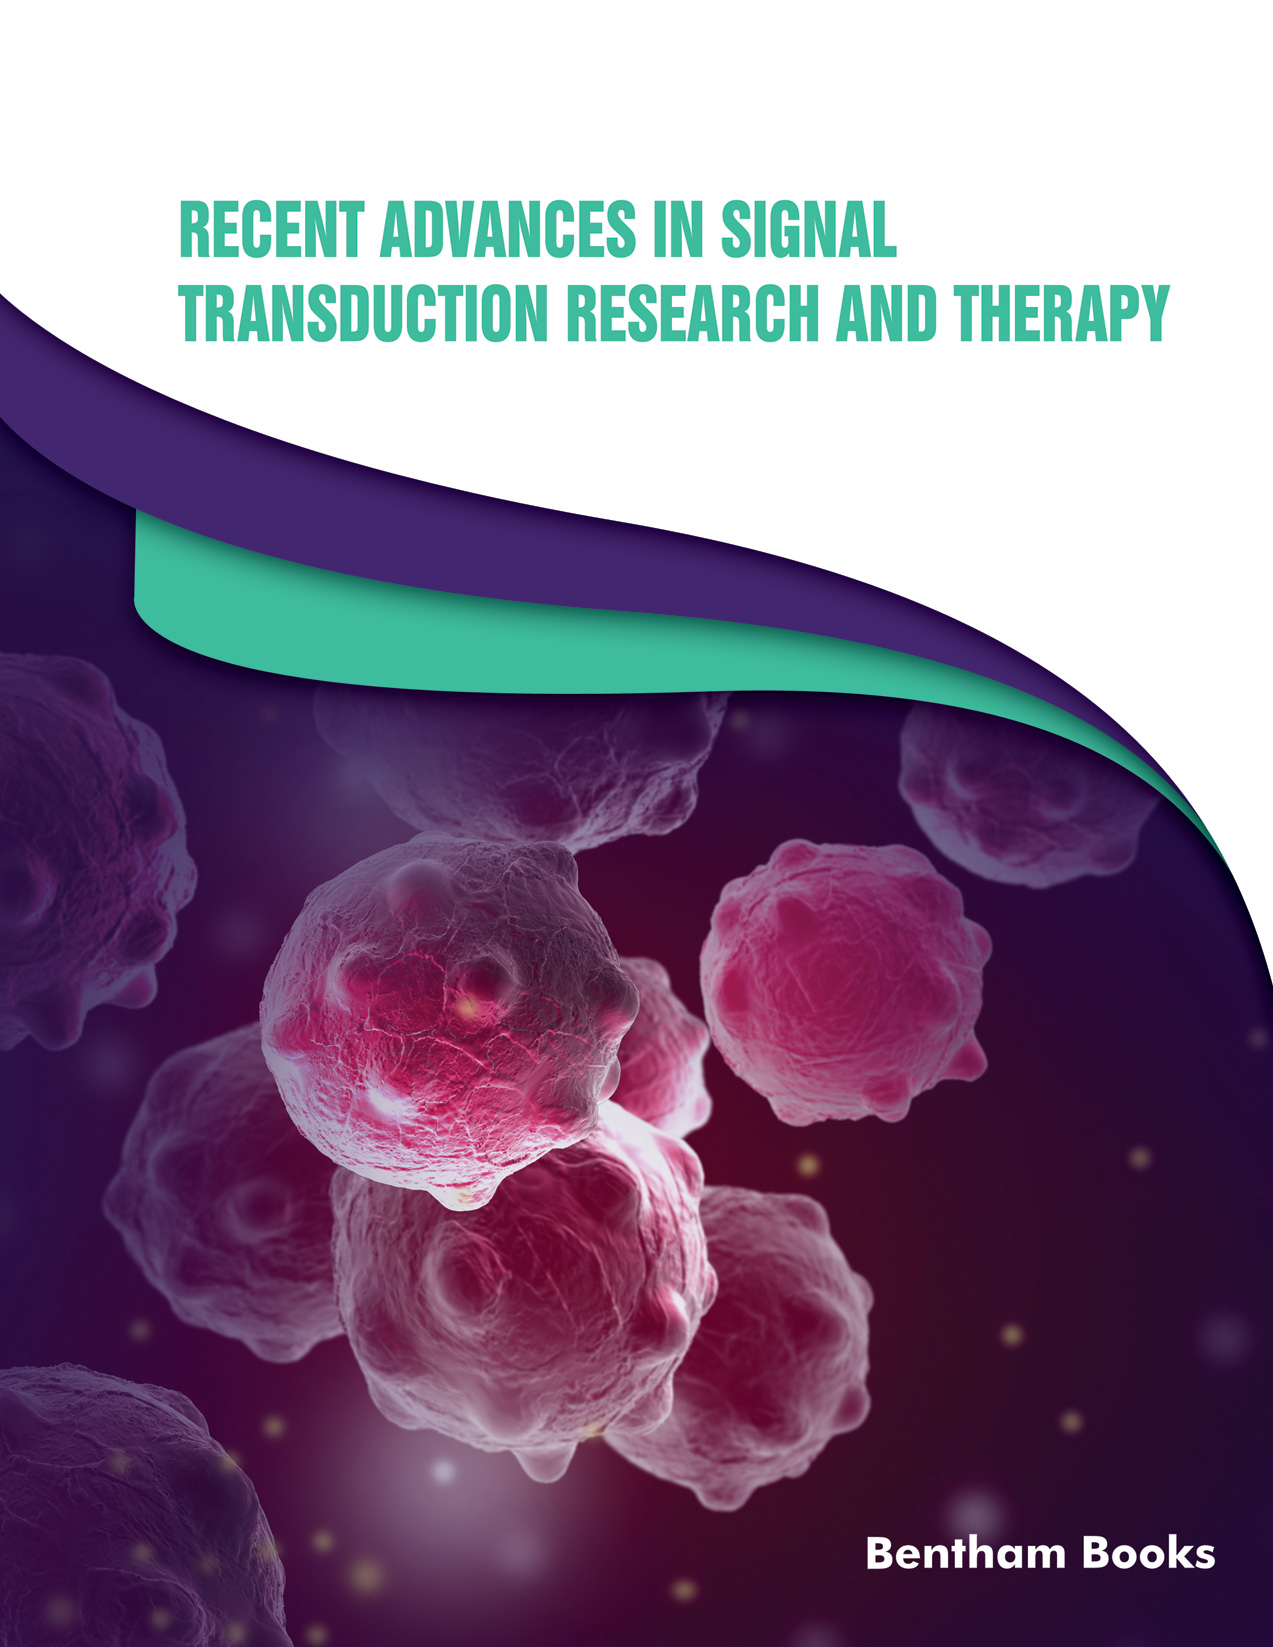 Recent Advances in Signal Transduction Research and Therapy